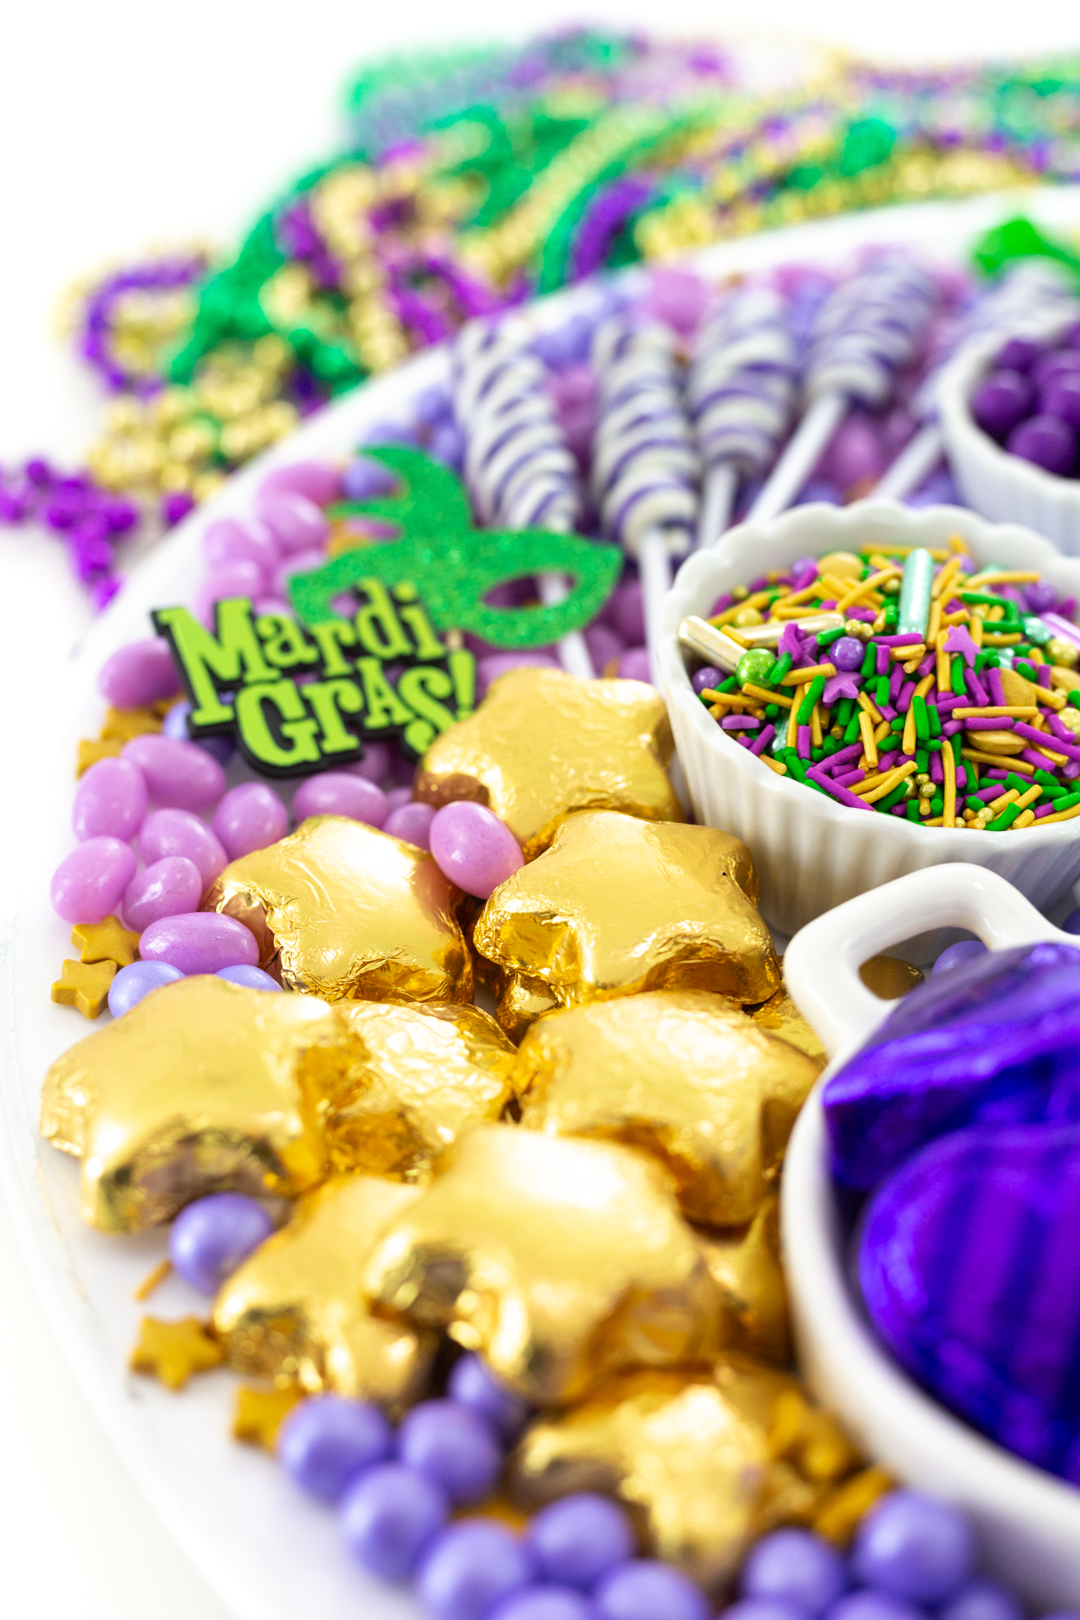 gorgeous tray of mardi gras themed candies. Pretty gold star chocolates and king cake inspired sprinkles from Fancy Sprinkles.